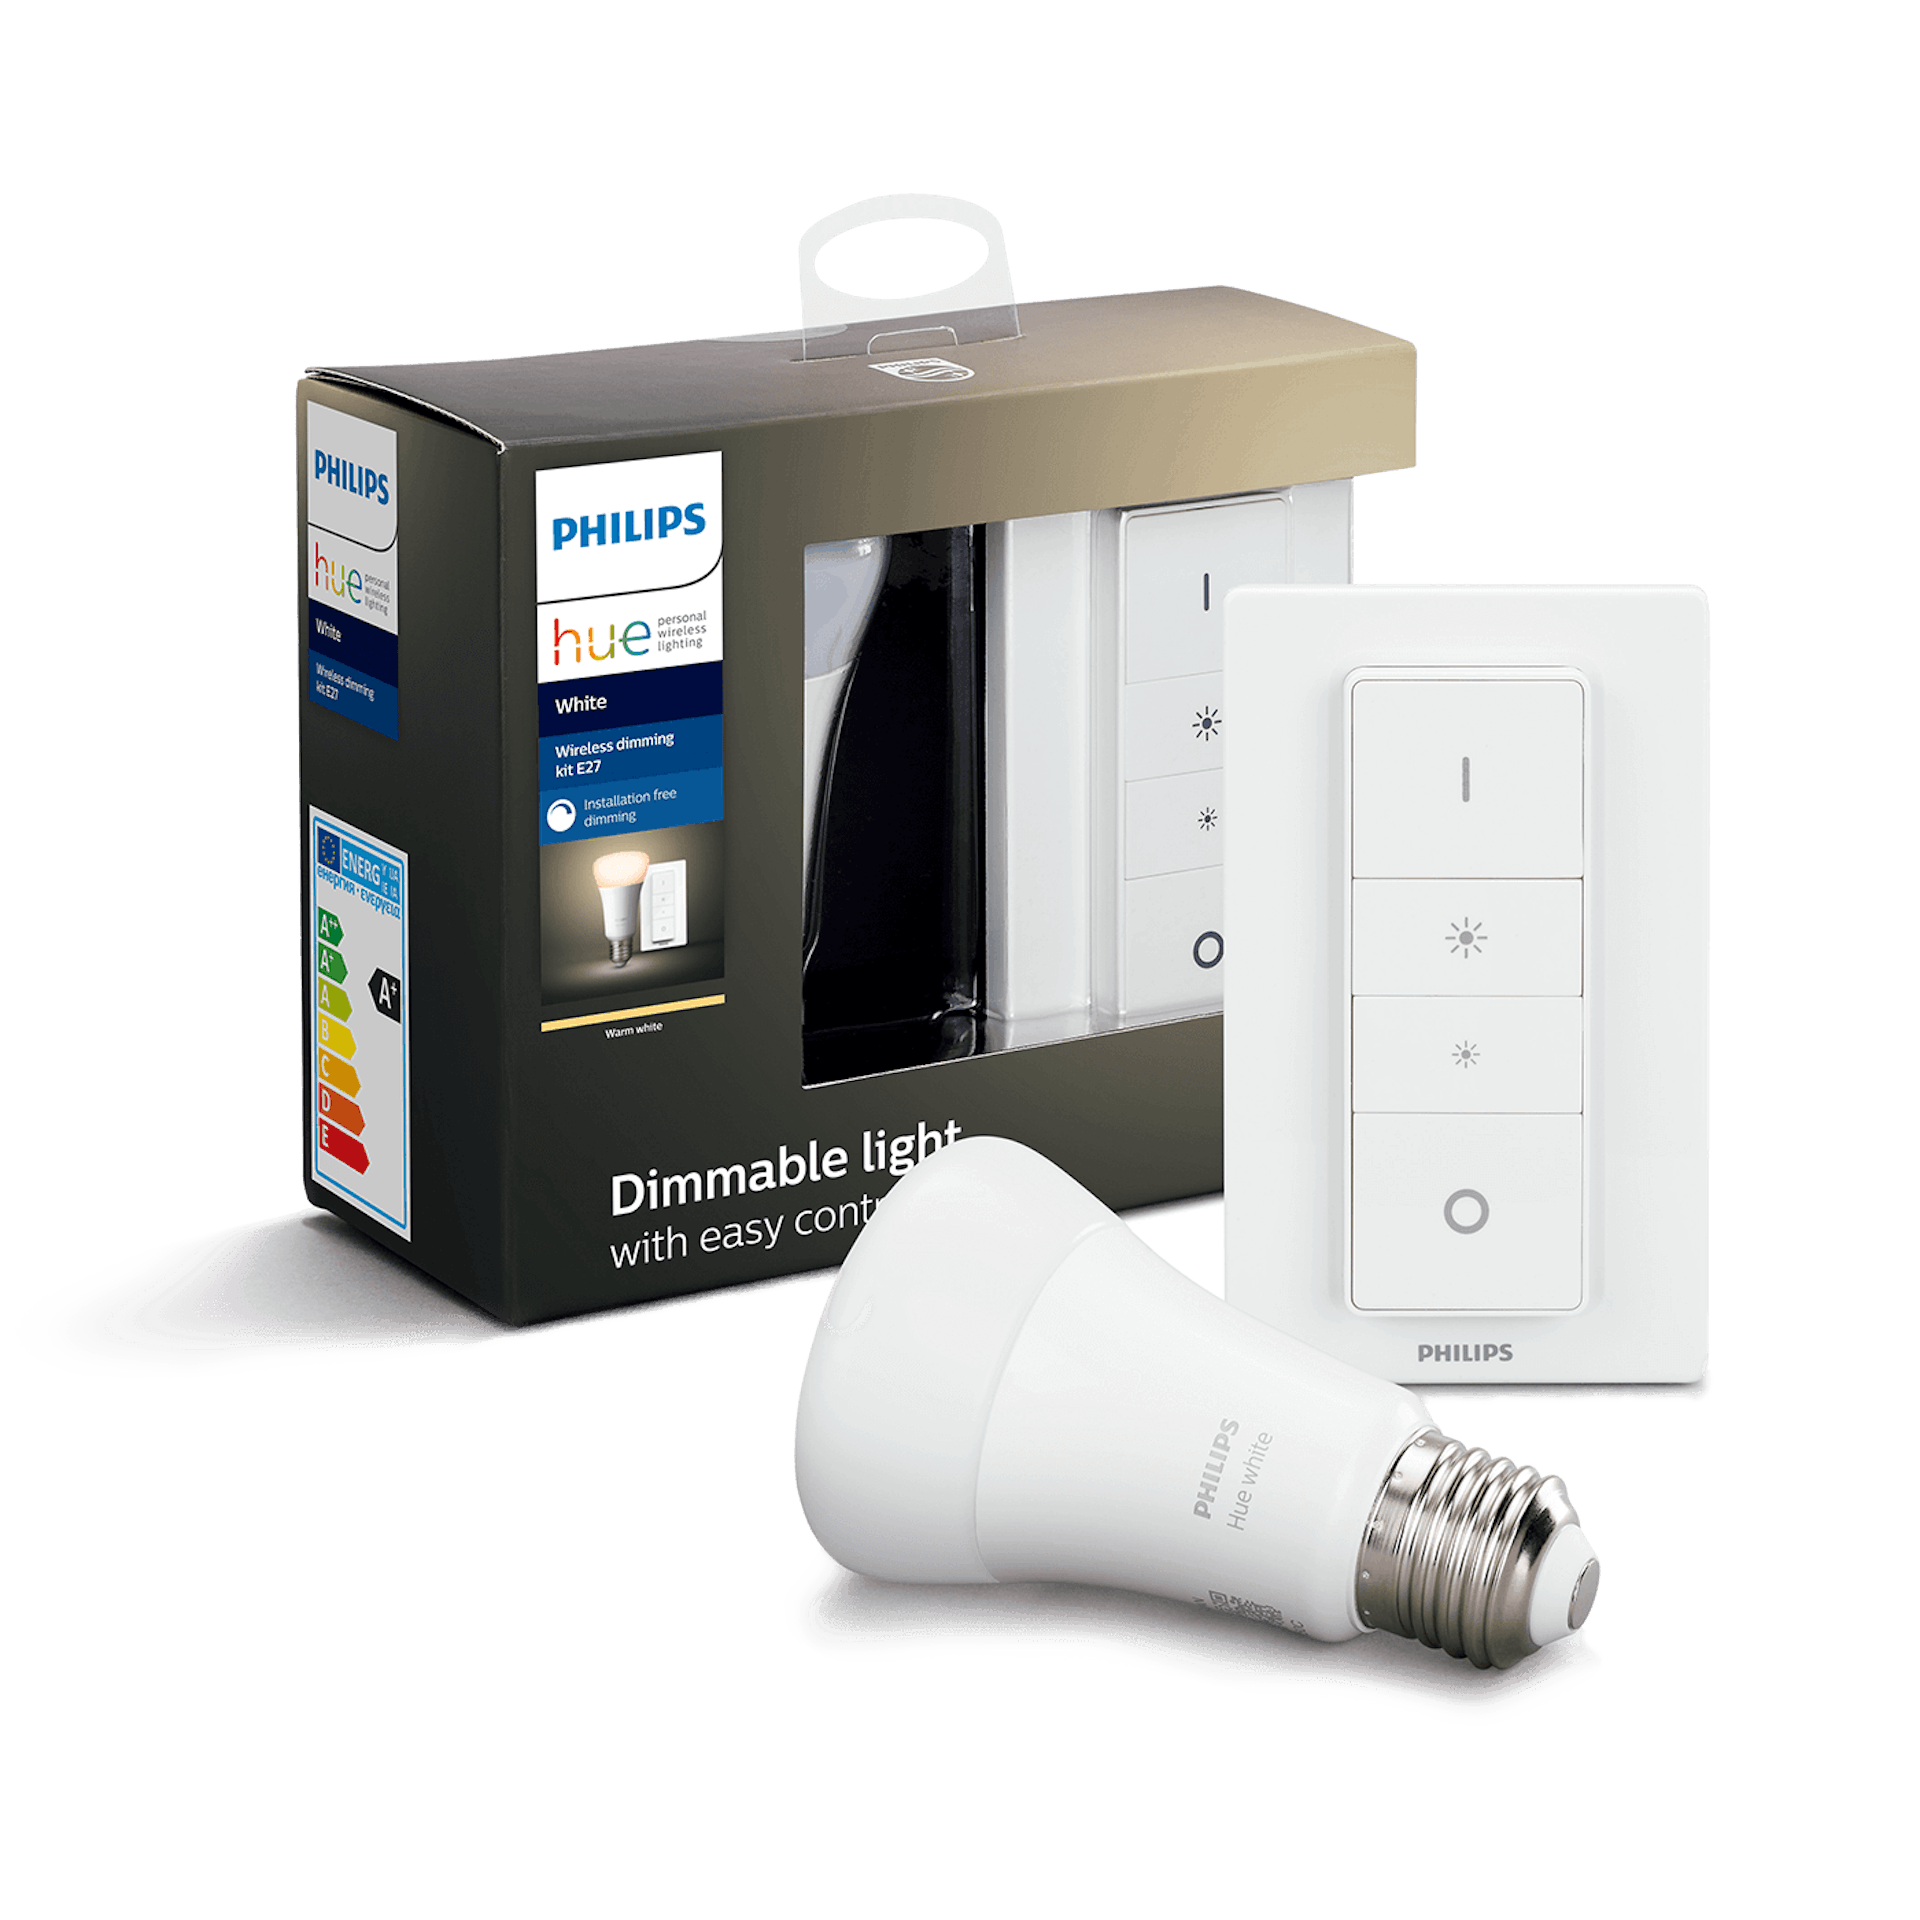 Philips Hue White E27 with Dimmer - Image 2